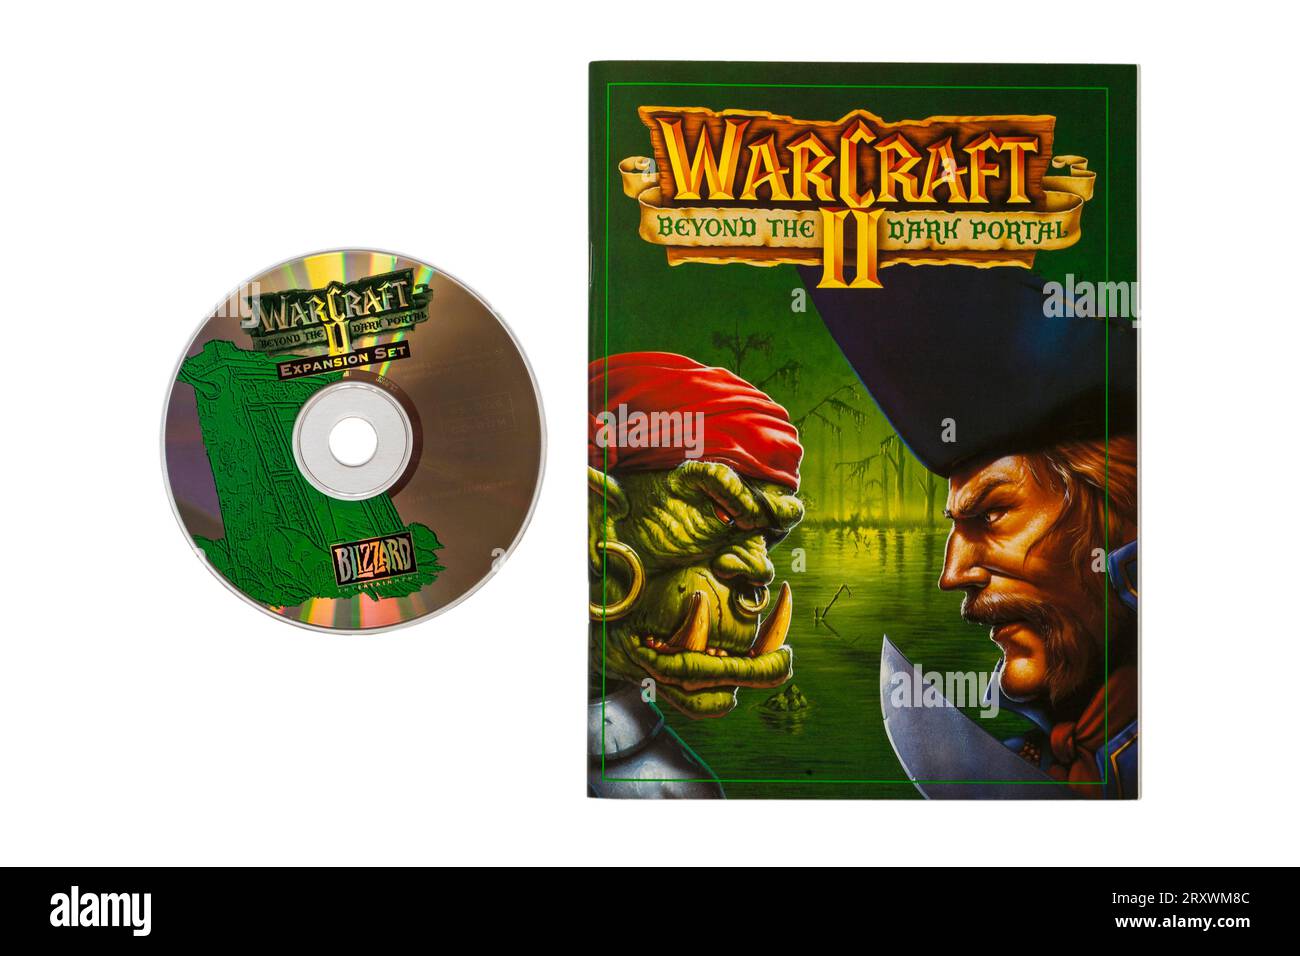 Warcraft II Tides of Darkness deluxe-edition computer game, Warcraft II beyond the dark portal book and disc isolated on white background Stock Photo